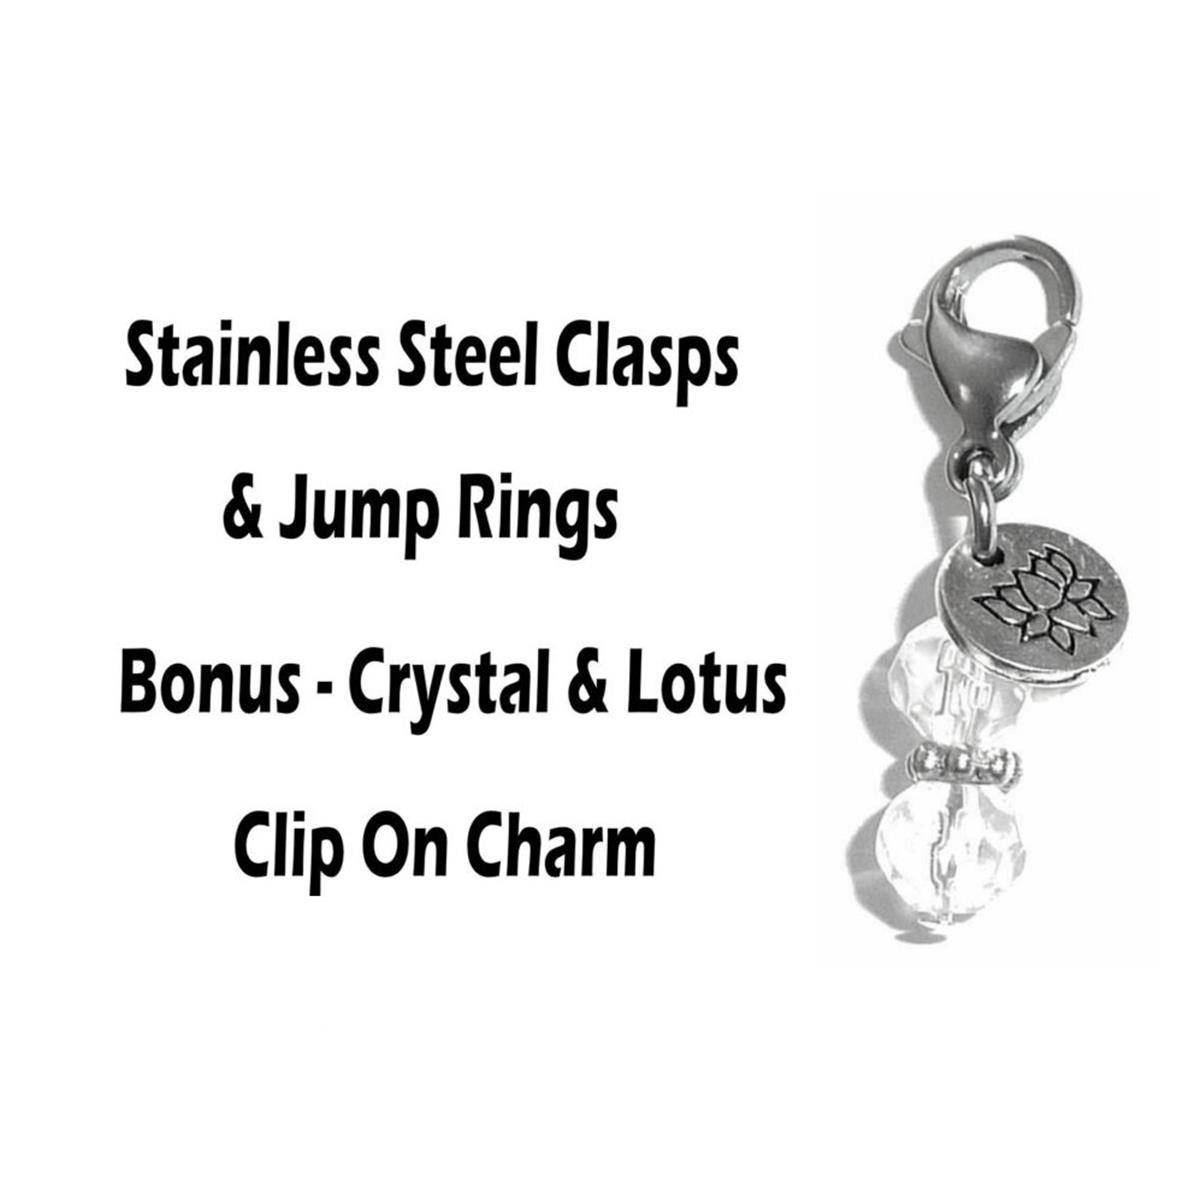 With God All Things Are Possible Clip On Charms - Inspirational Charms Clip On Anywhere